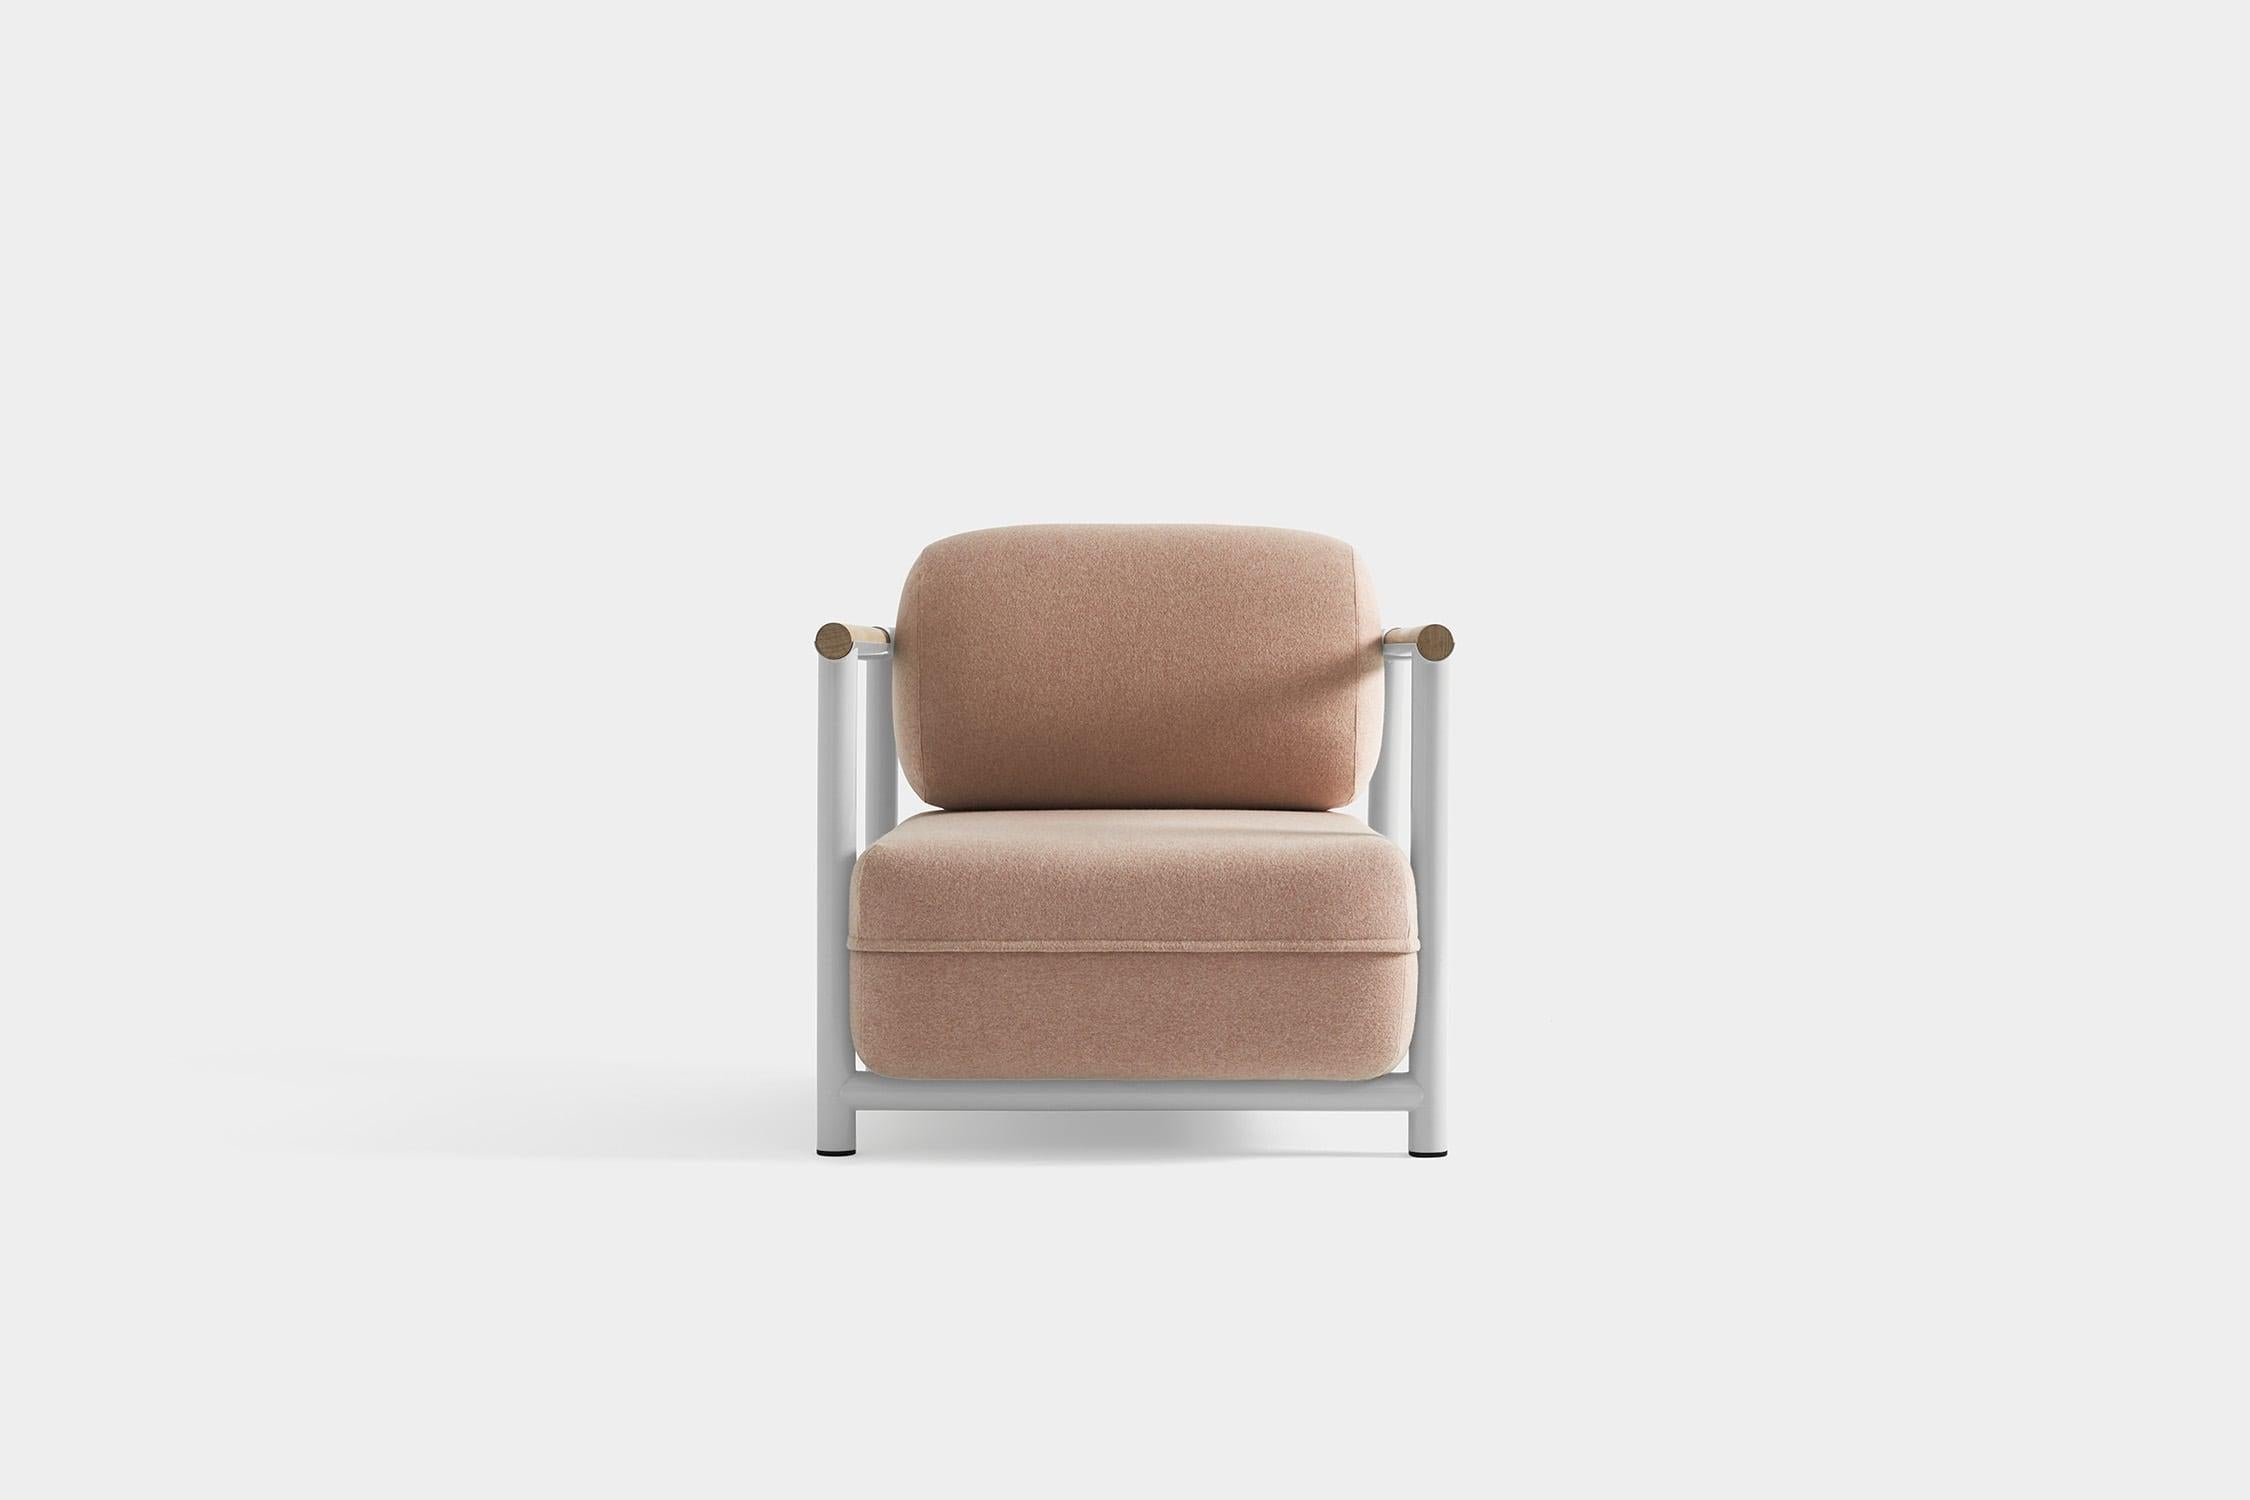 Ara armchair with side table by Pepe Albargues
Dimensions: W 74, D 74, H 125, Seat 43
Materials: Iron backrest structure and pine wood seat structure
Foam CMHR (high resilience and flame retardant) for all our cushion filling systems
Cushion 50%